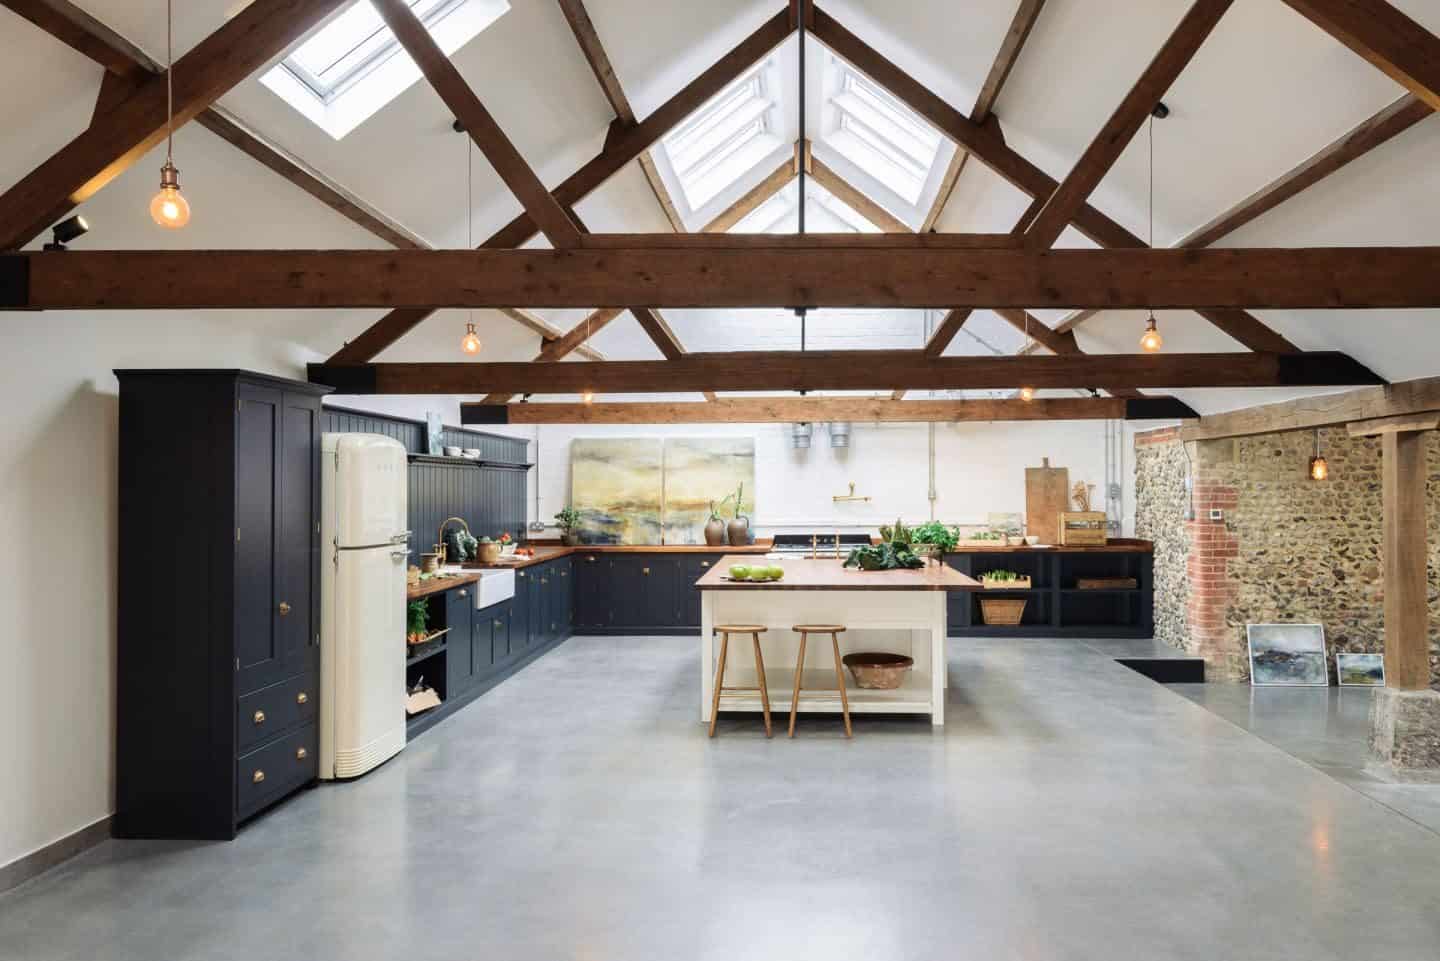 The Real Shaker Kitchen by deVOL